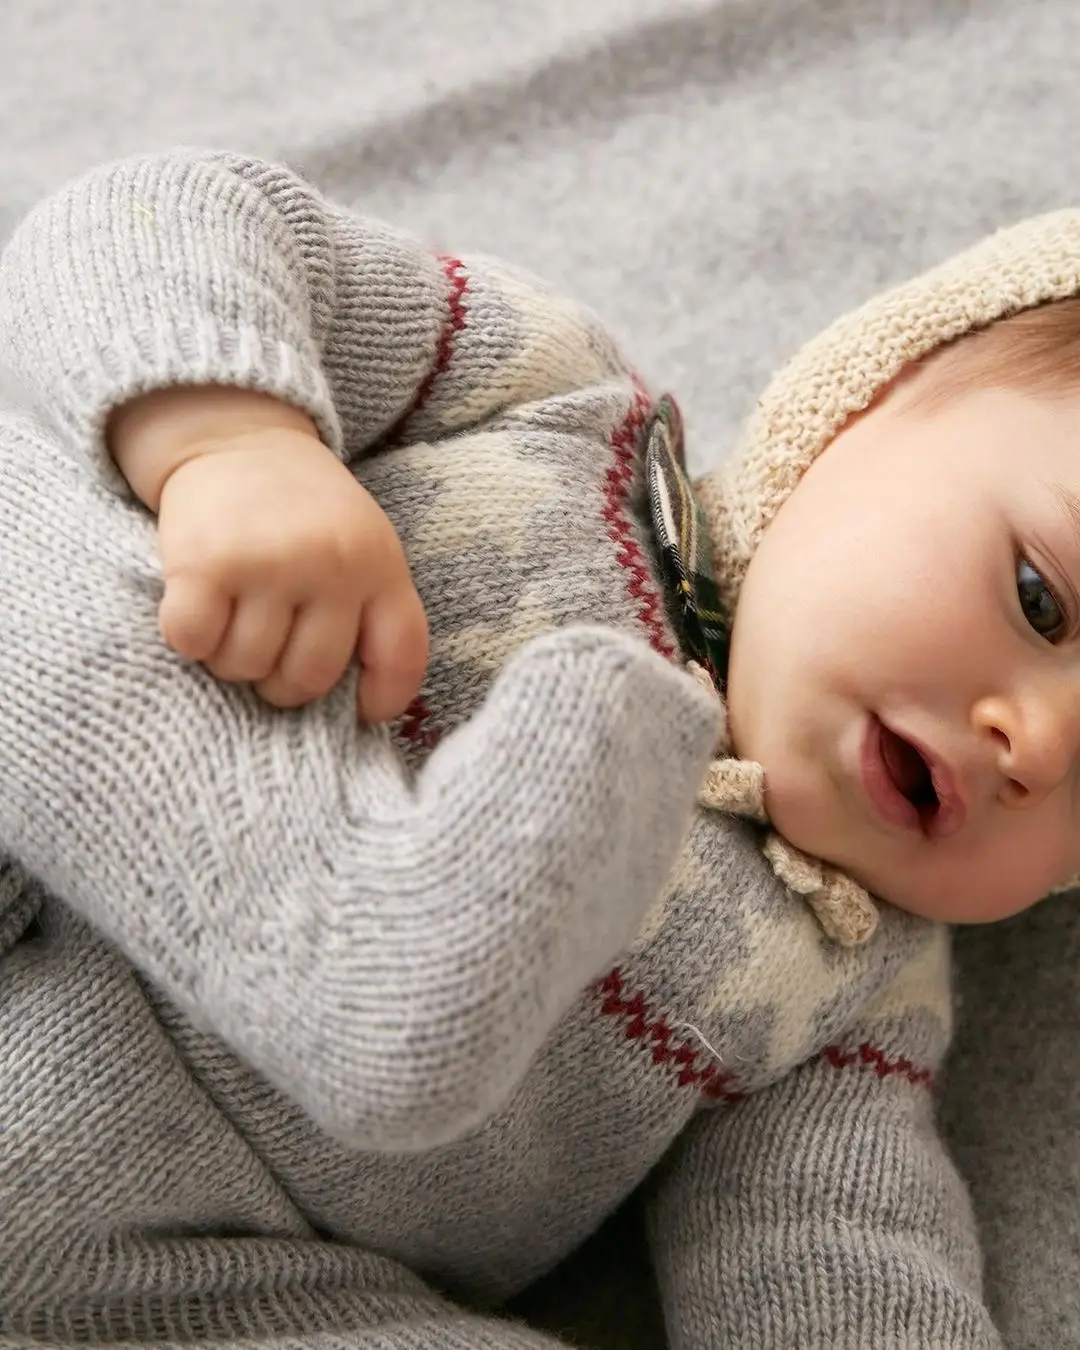 17 Sweet Things a New Mom Can Look Forward to ...